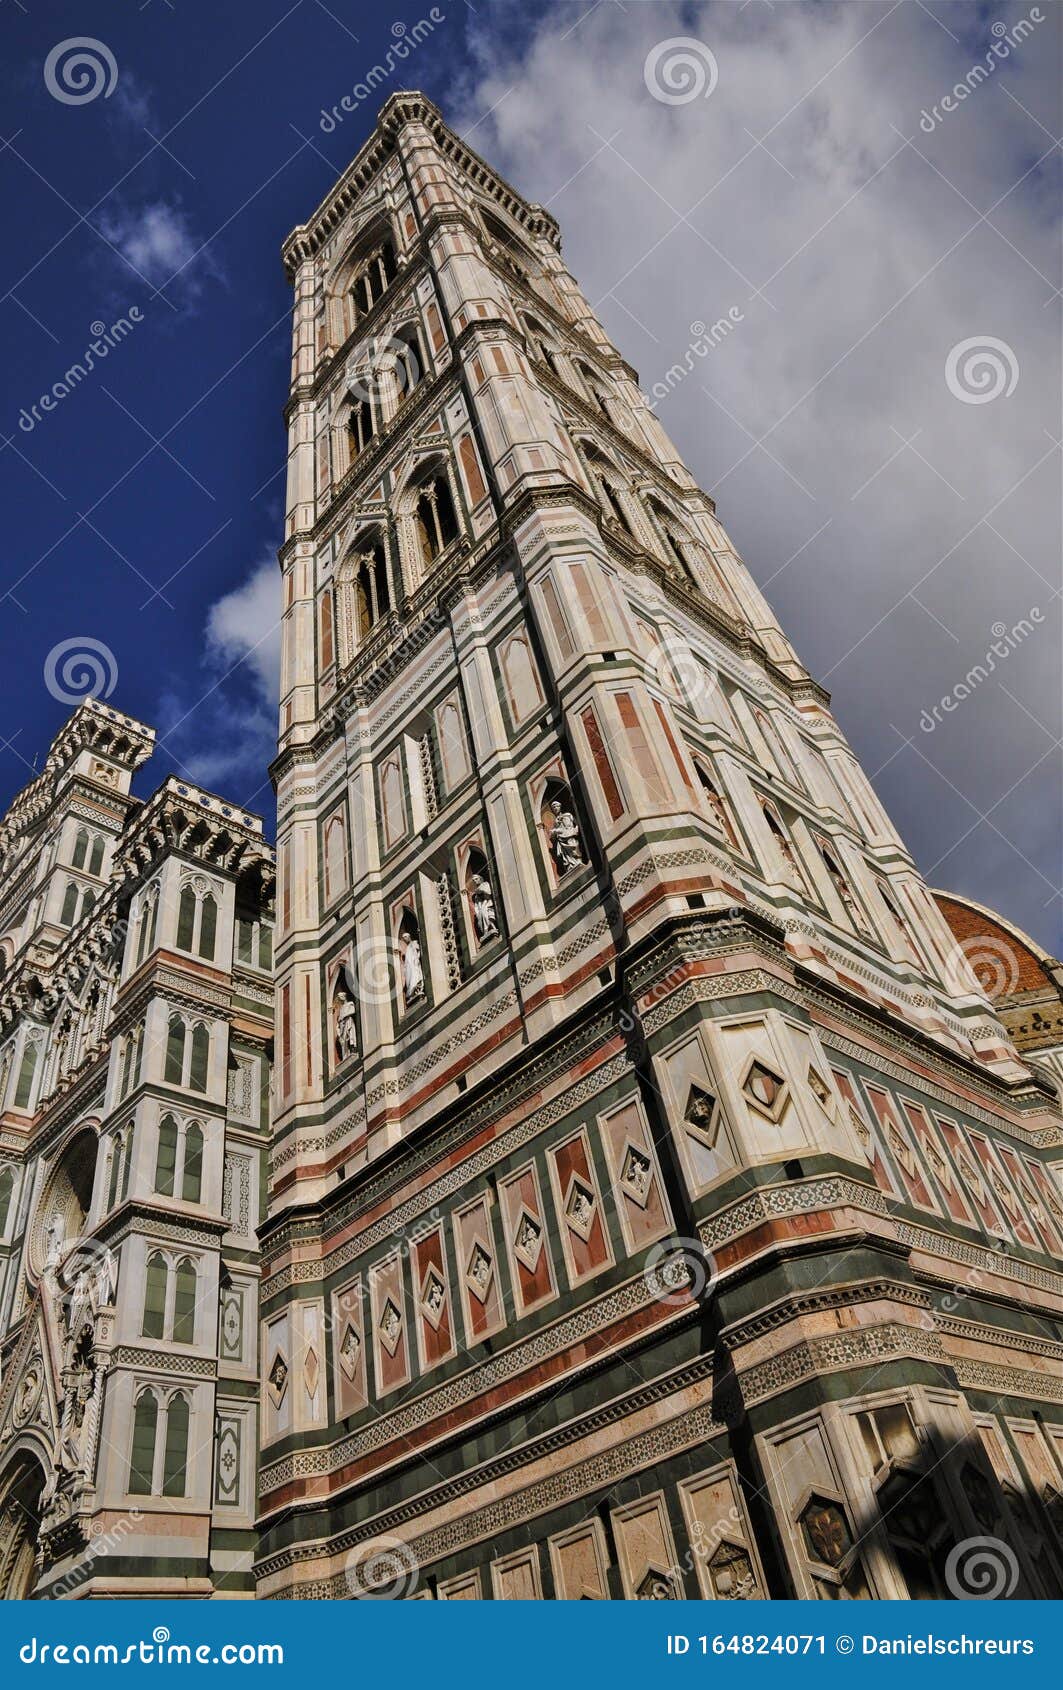 the giotto campanile and florence cathedral